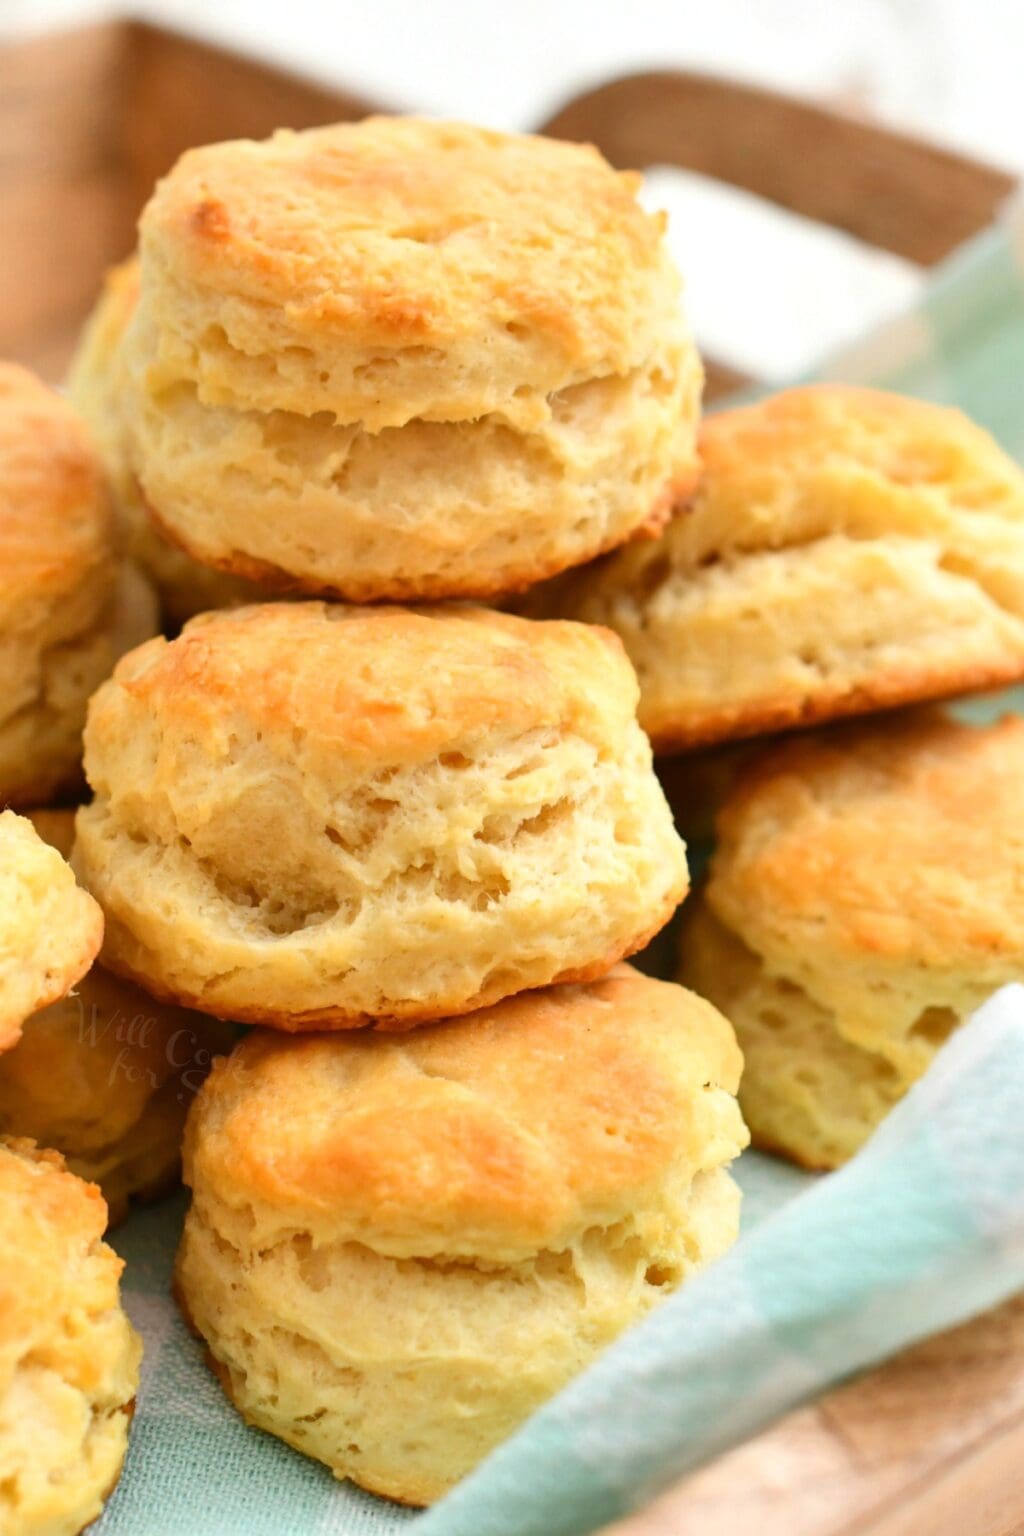 Homemade Buttermilk Biscuits - So Easy To Make For Dinner or Snack